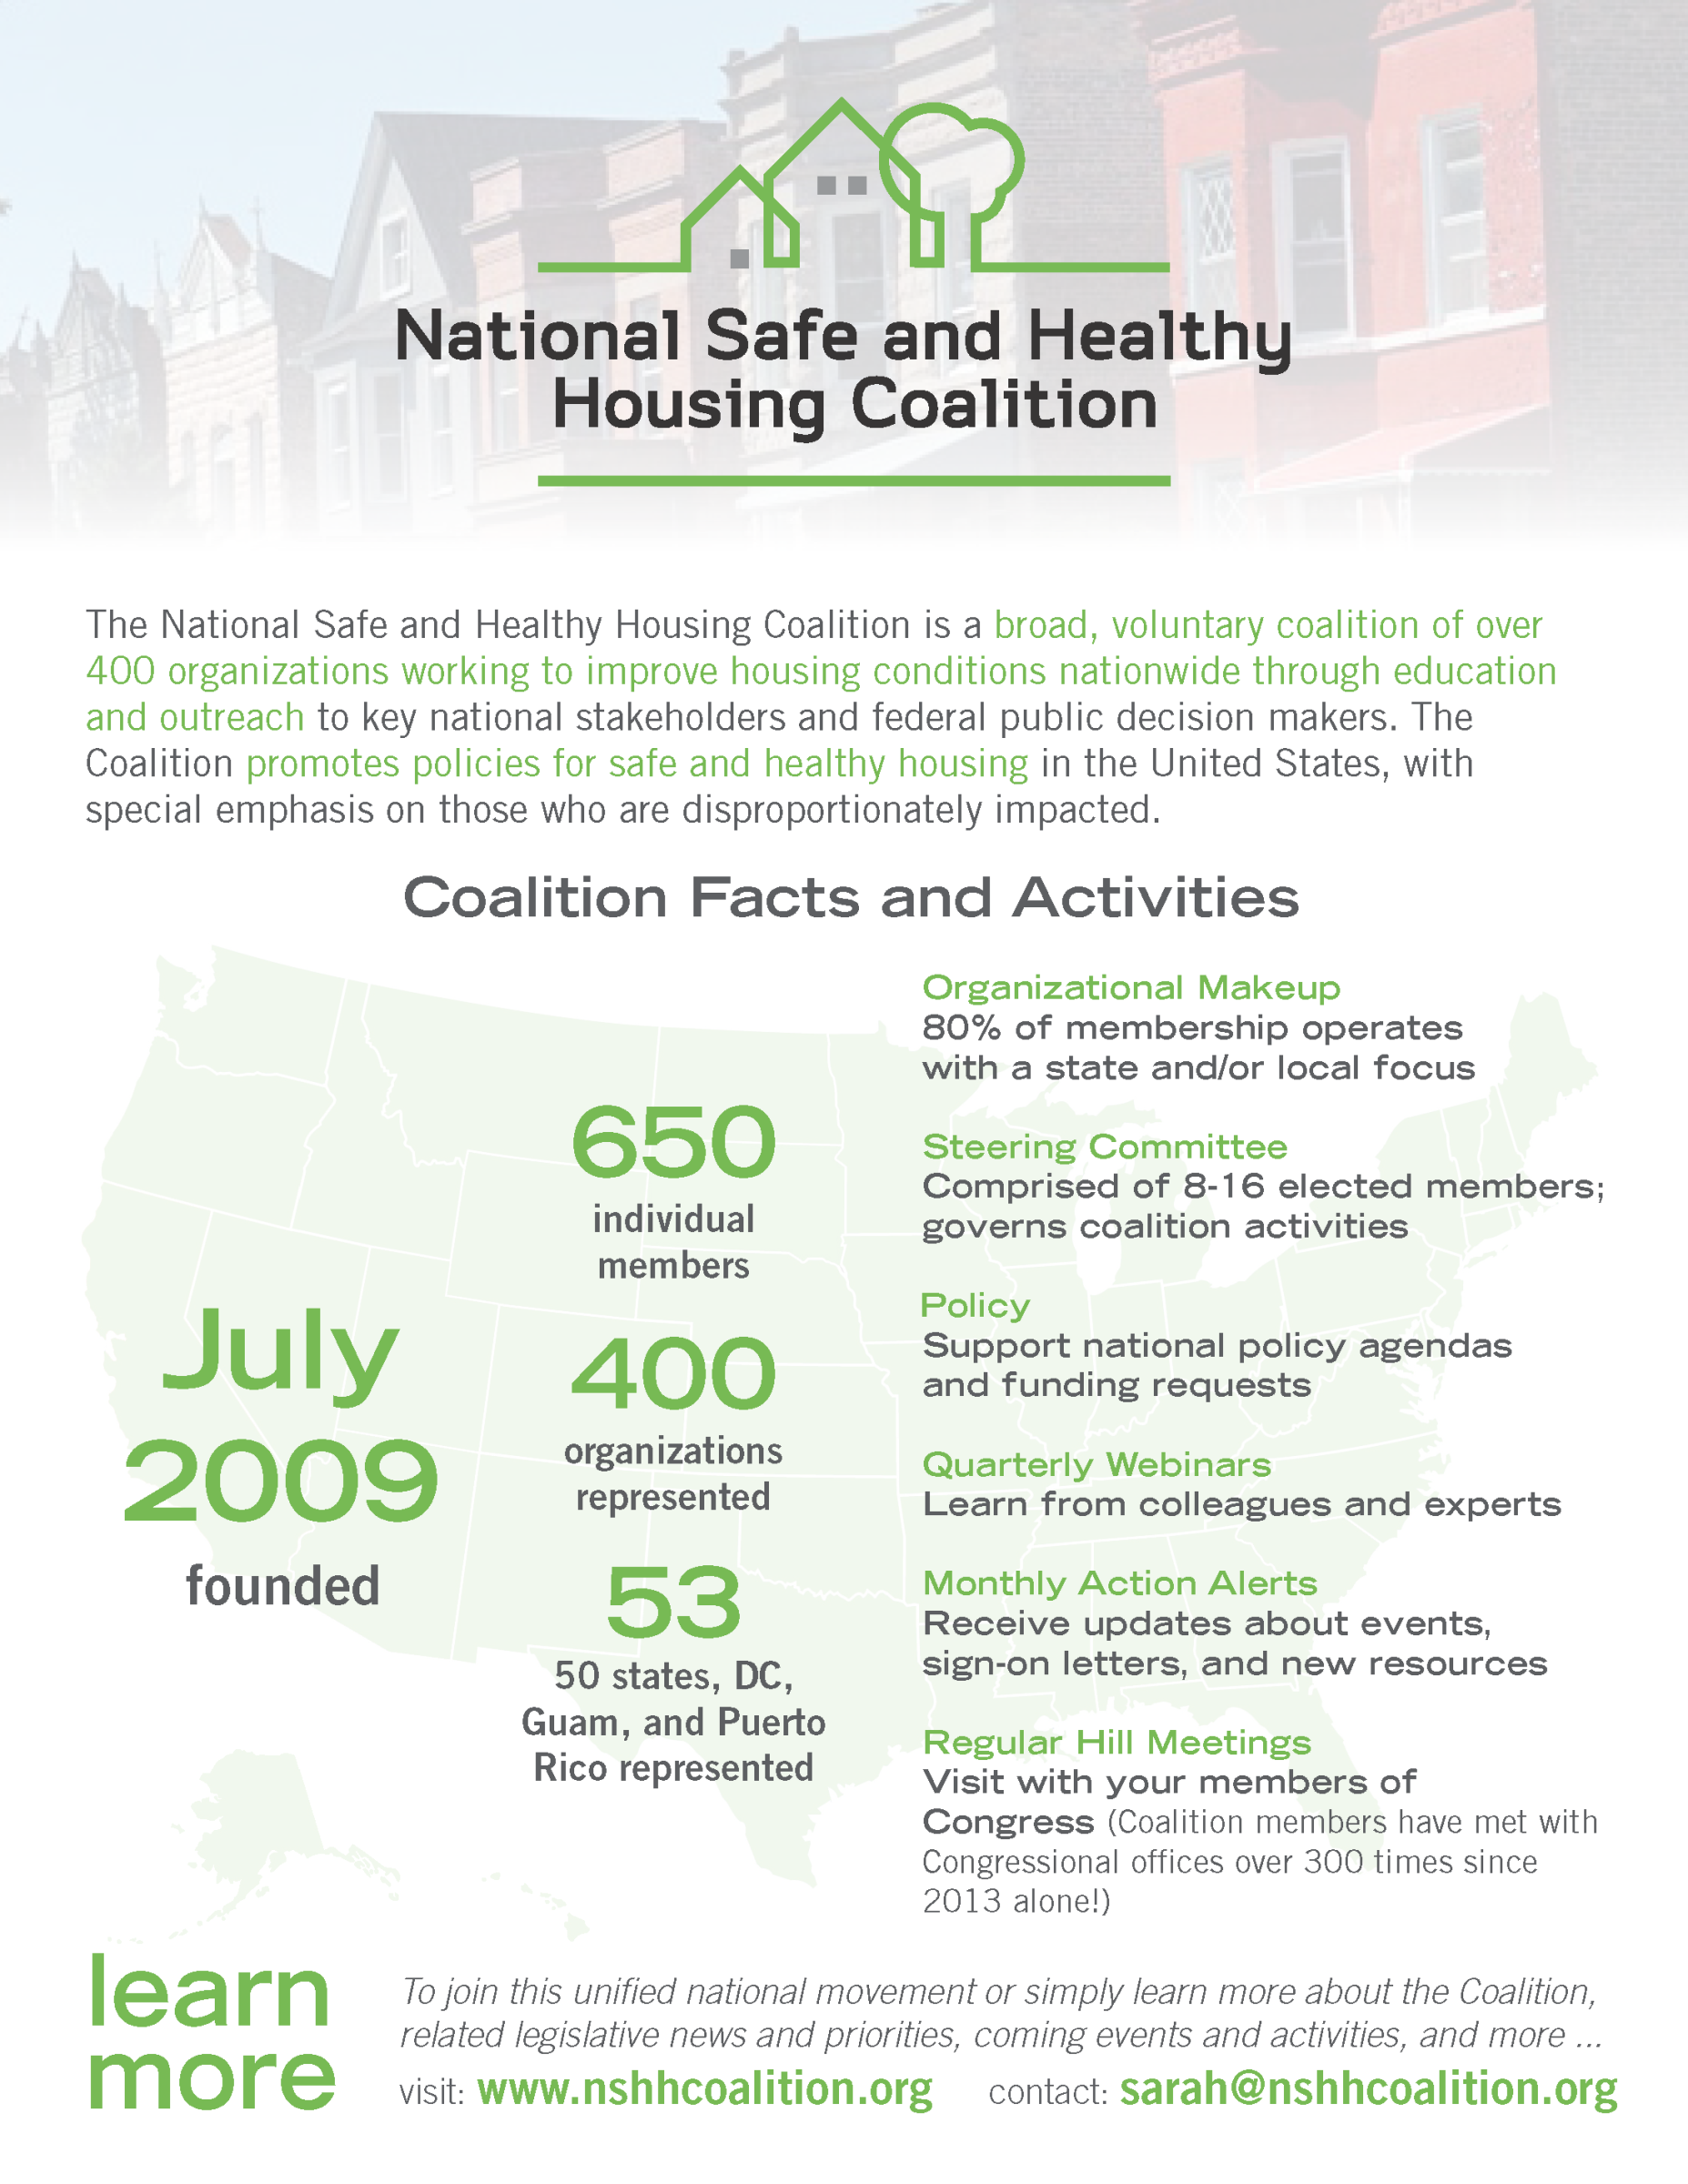 NSHHC Facts and Activities